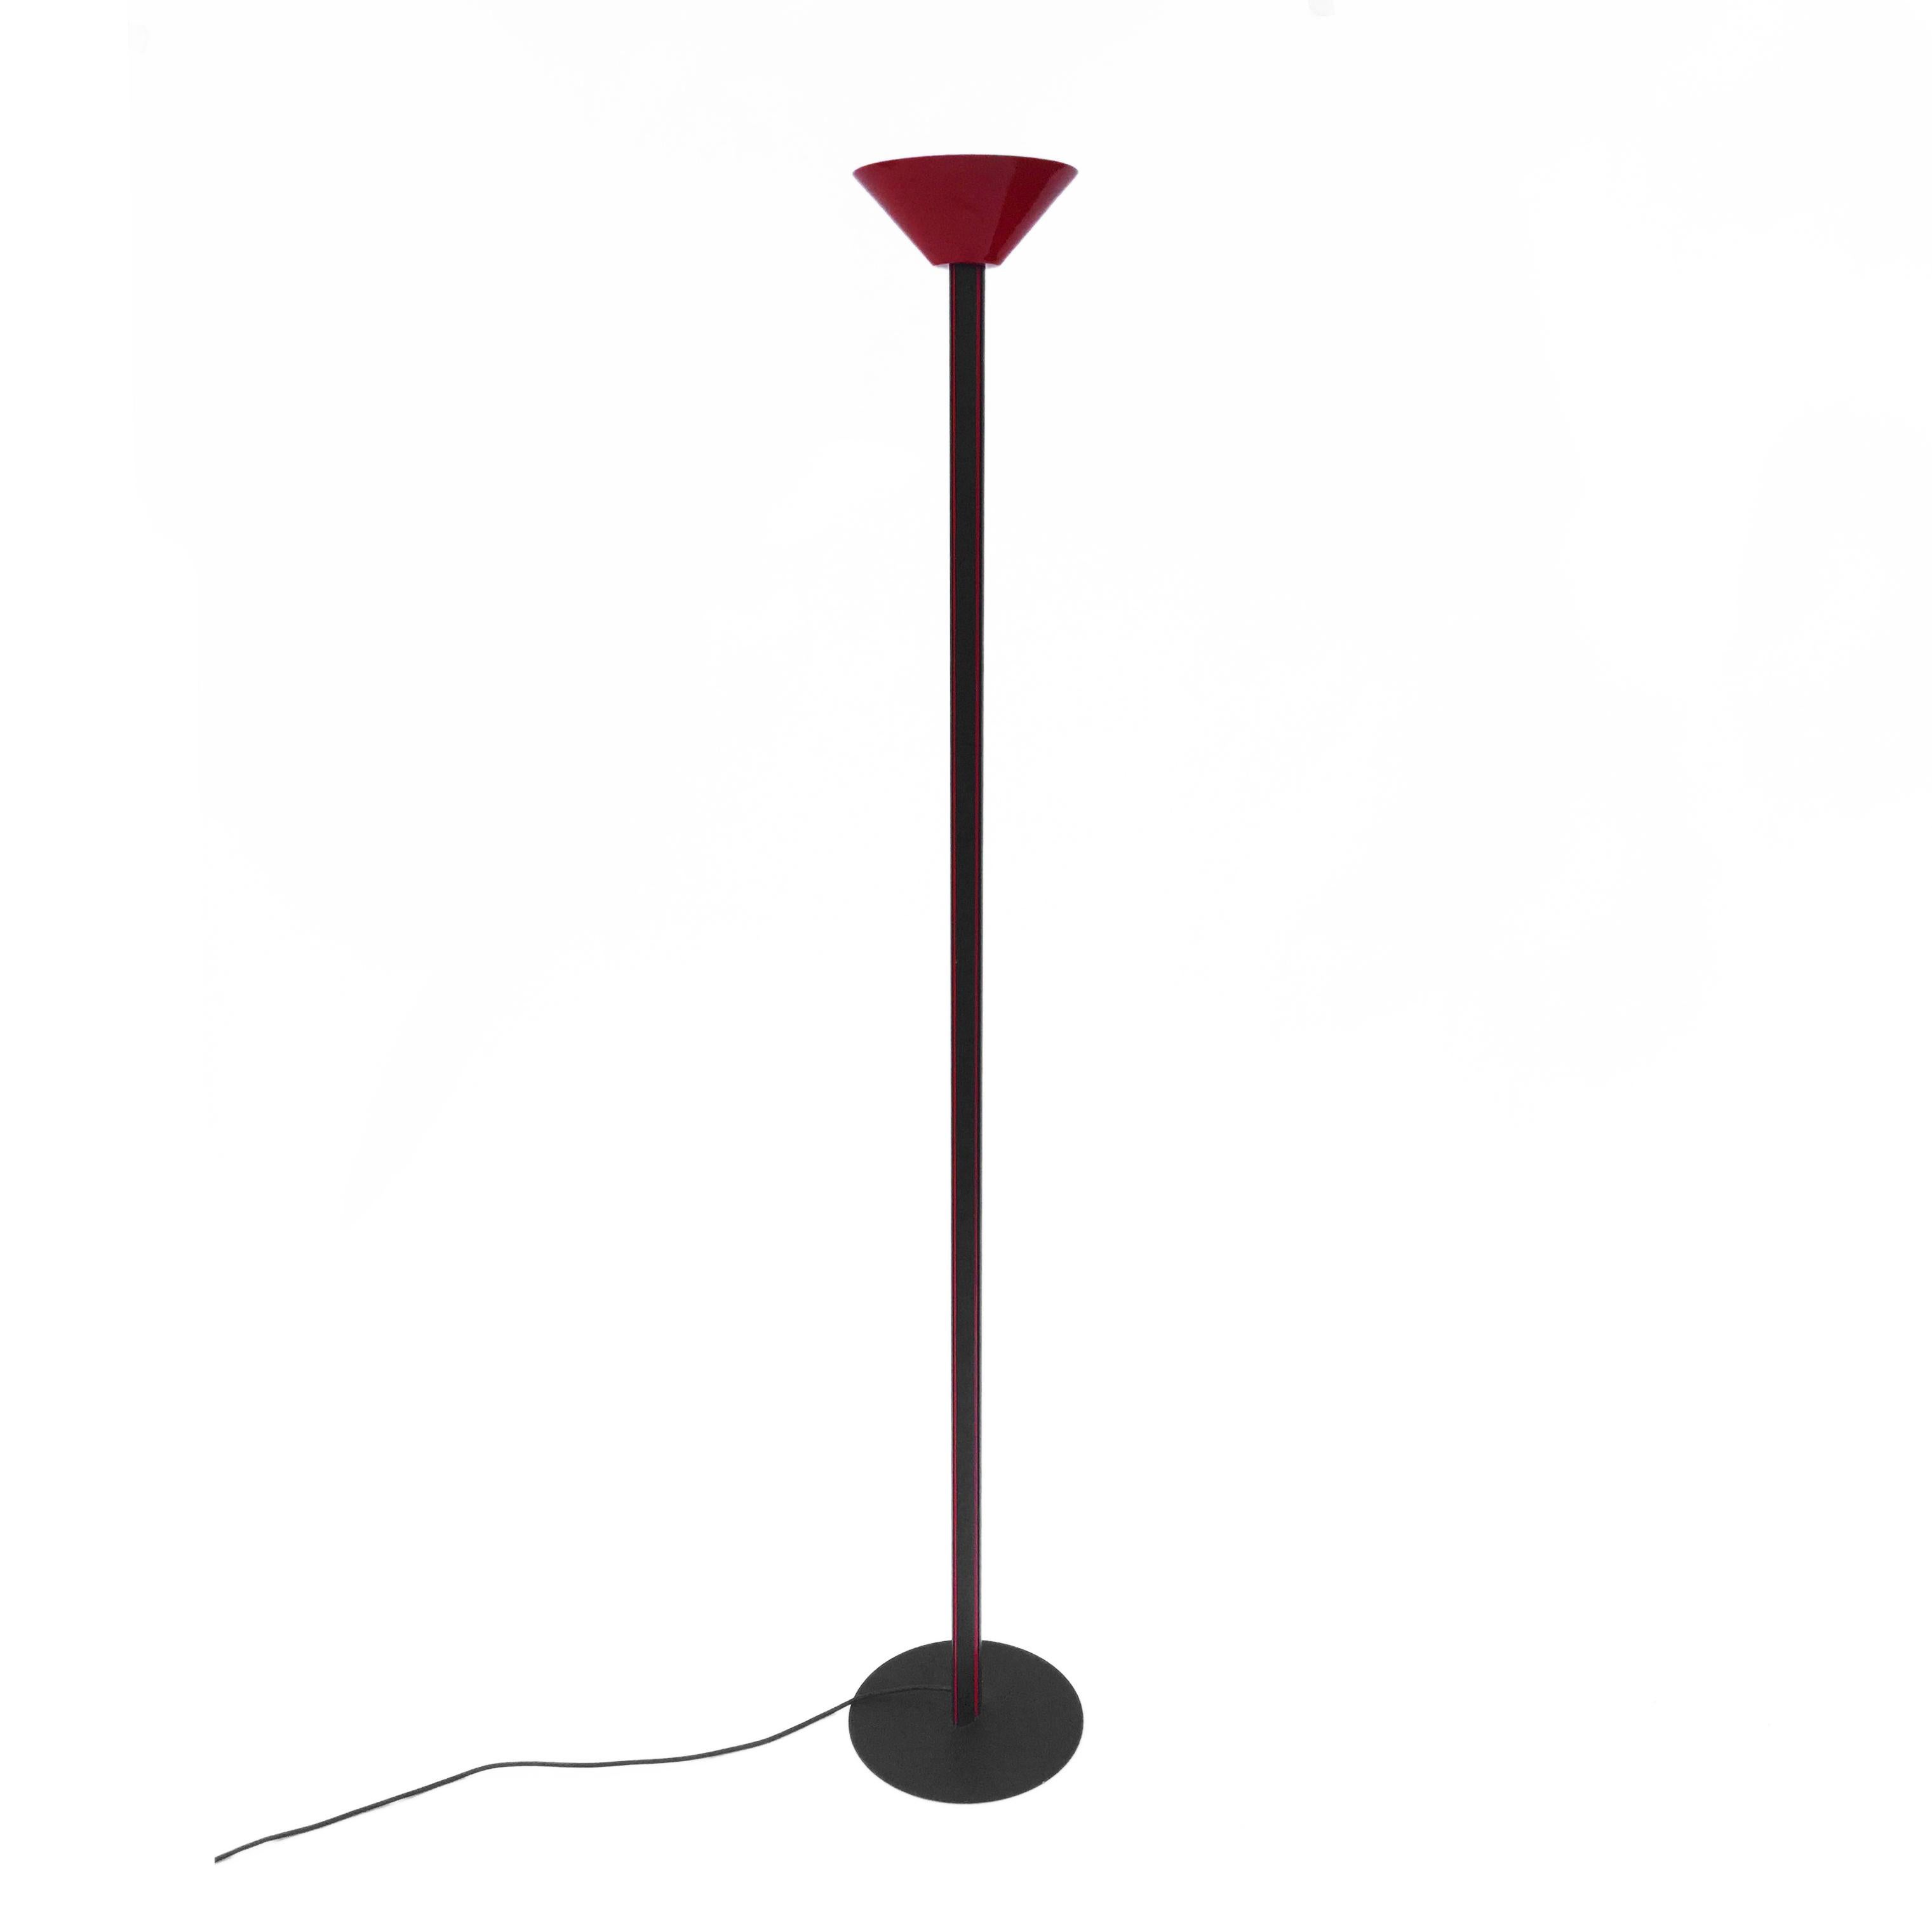 Pair of Memphis Milano-inspired floor lamps in black matte powder coated paint, with red stripes and red lacquered cone shaped shades. Halogen lights. Please note that the price is per lamp, but they could be sold together.

Please contact us for